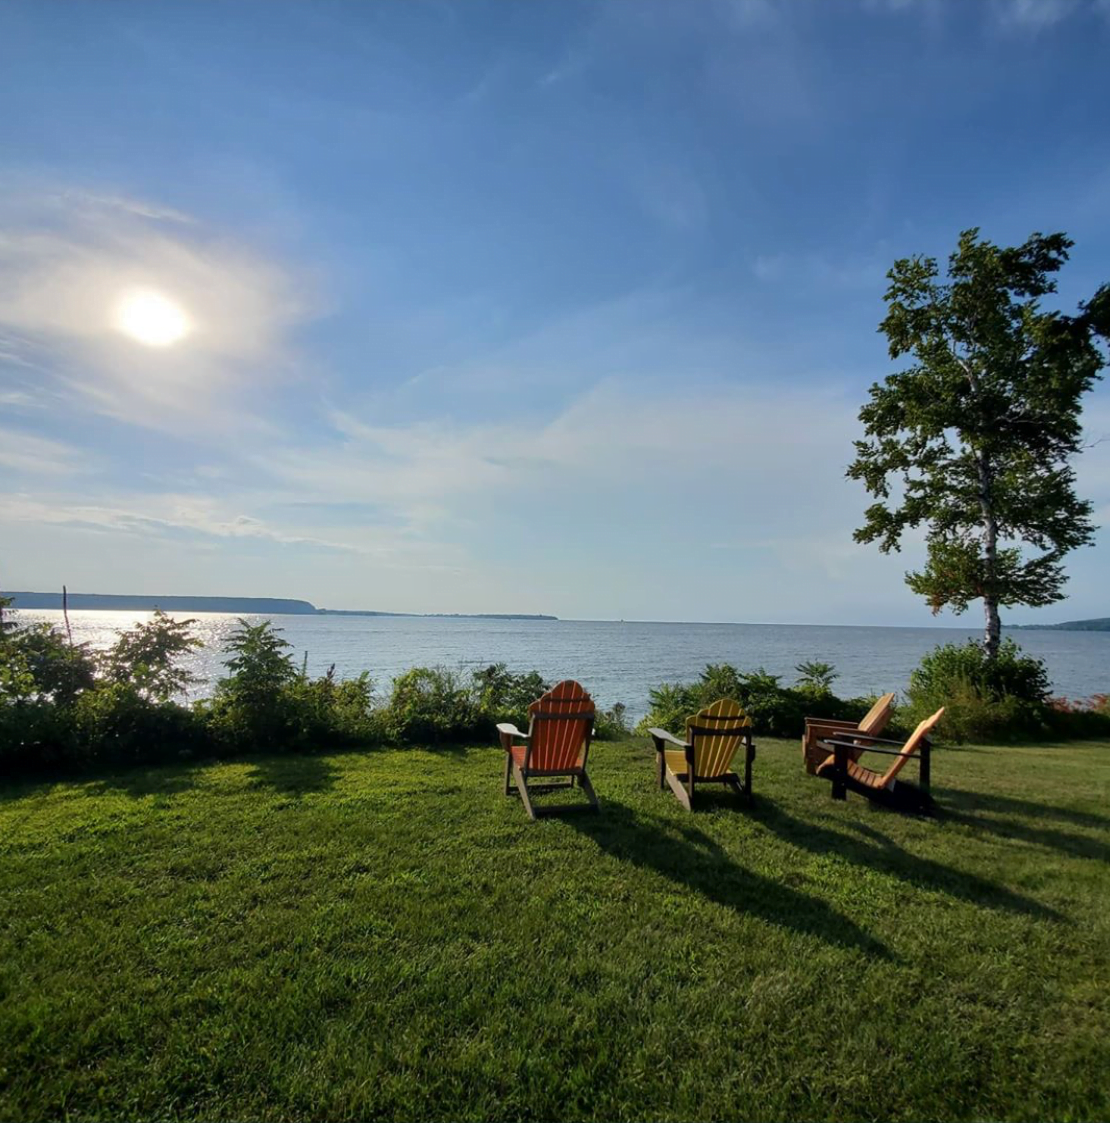 Vaughn Lowery photographs his stay in Door County, Wisconsin for 360 MAGAZINE.